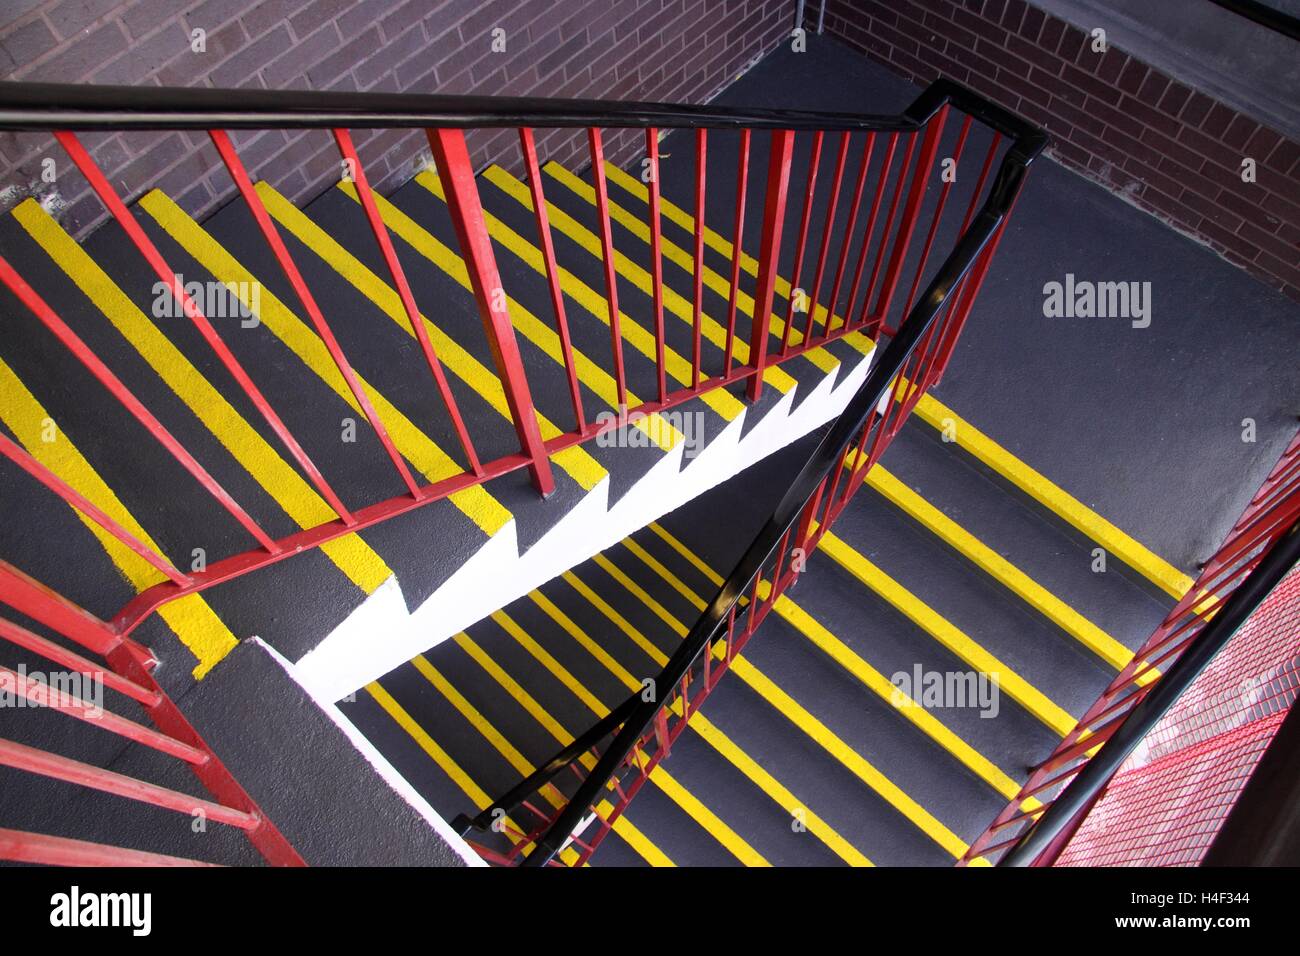 View down a staircase with fluorescent safety strips painted on the edge of each tread. Stock Photo